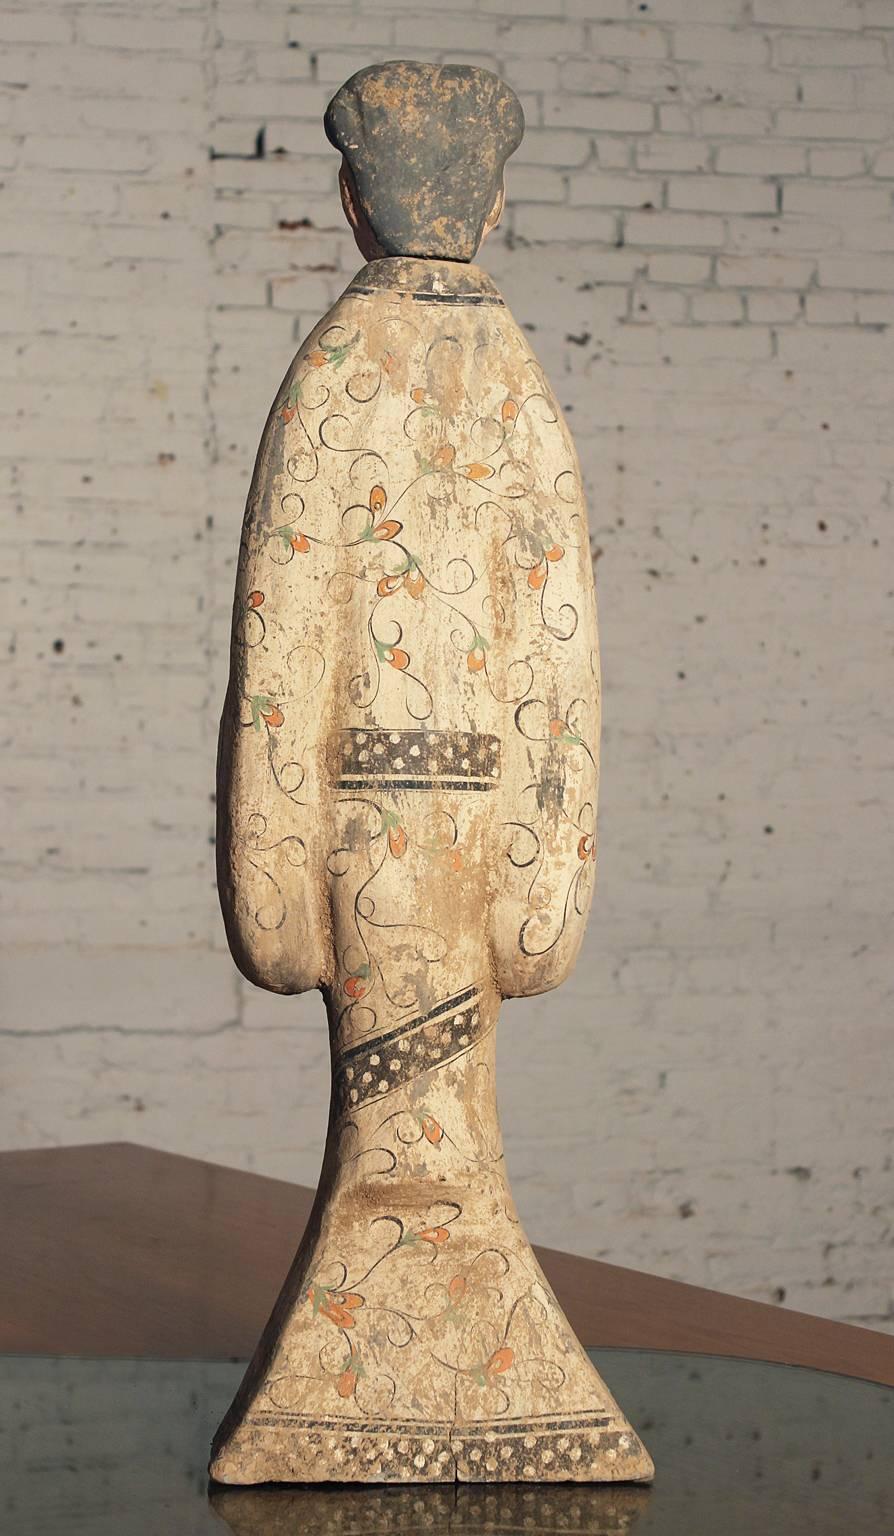 Wonderful 20th century example of Han Dynasty female funerary or tomb figure. In great vintage condition.

This very finely crafted Han-style tomb figure or funerary statue will make an awesome addition to your décor. Although details on this